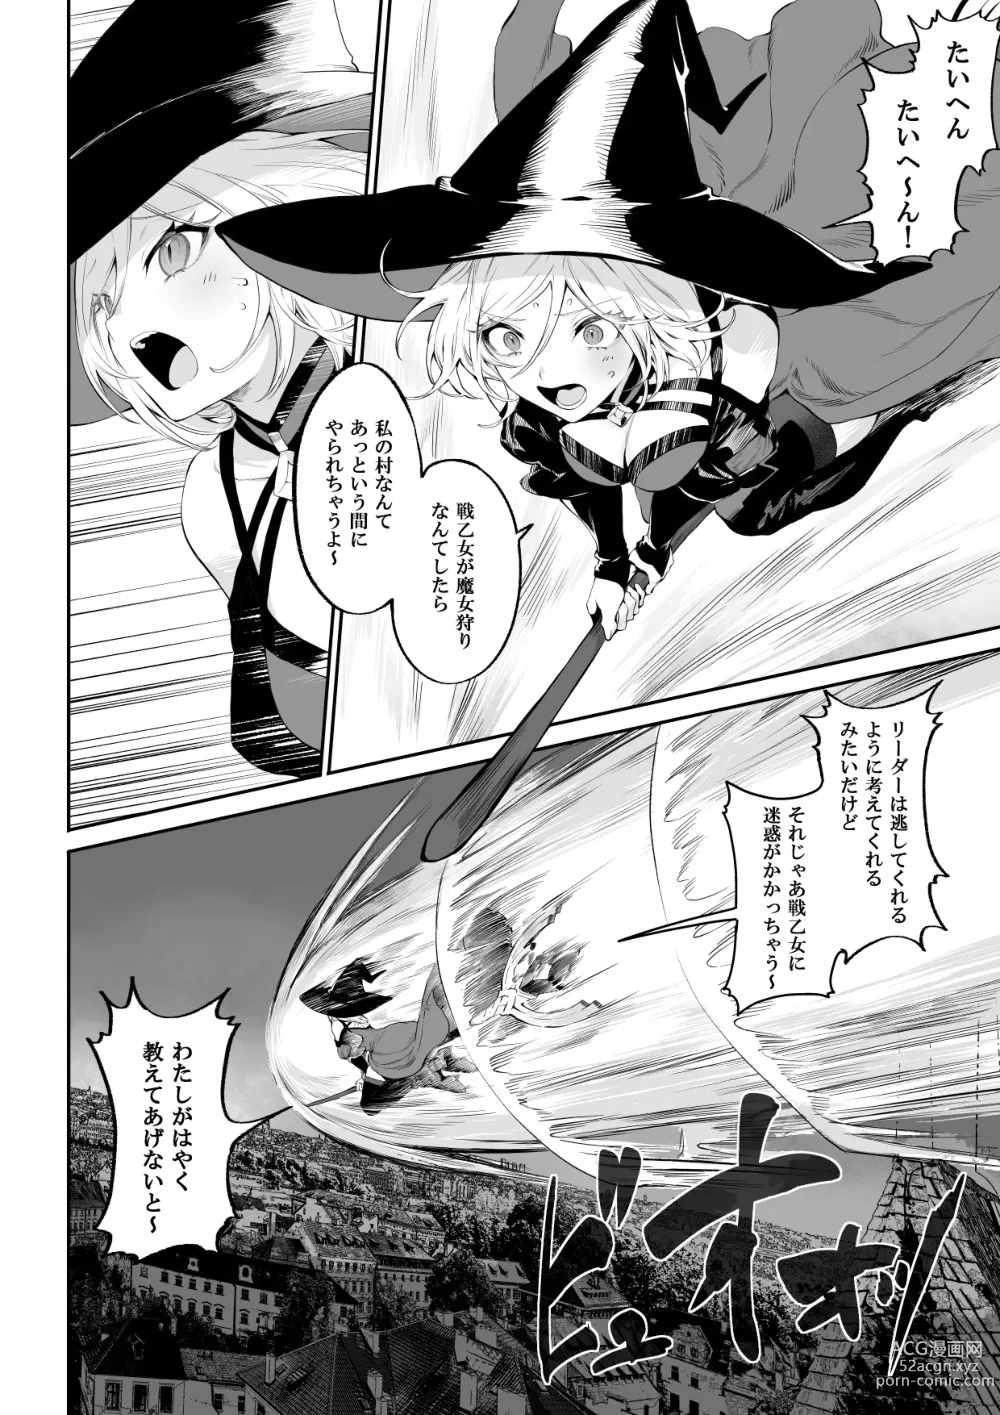 Page 15 of doujinshi 戦乙女といくさごと！〜女魔法使い編〜